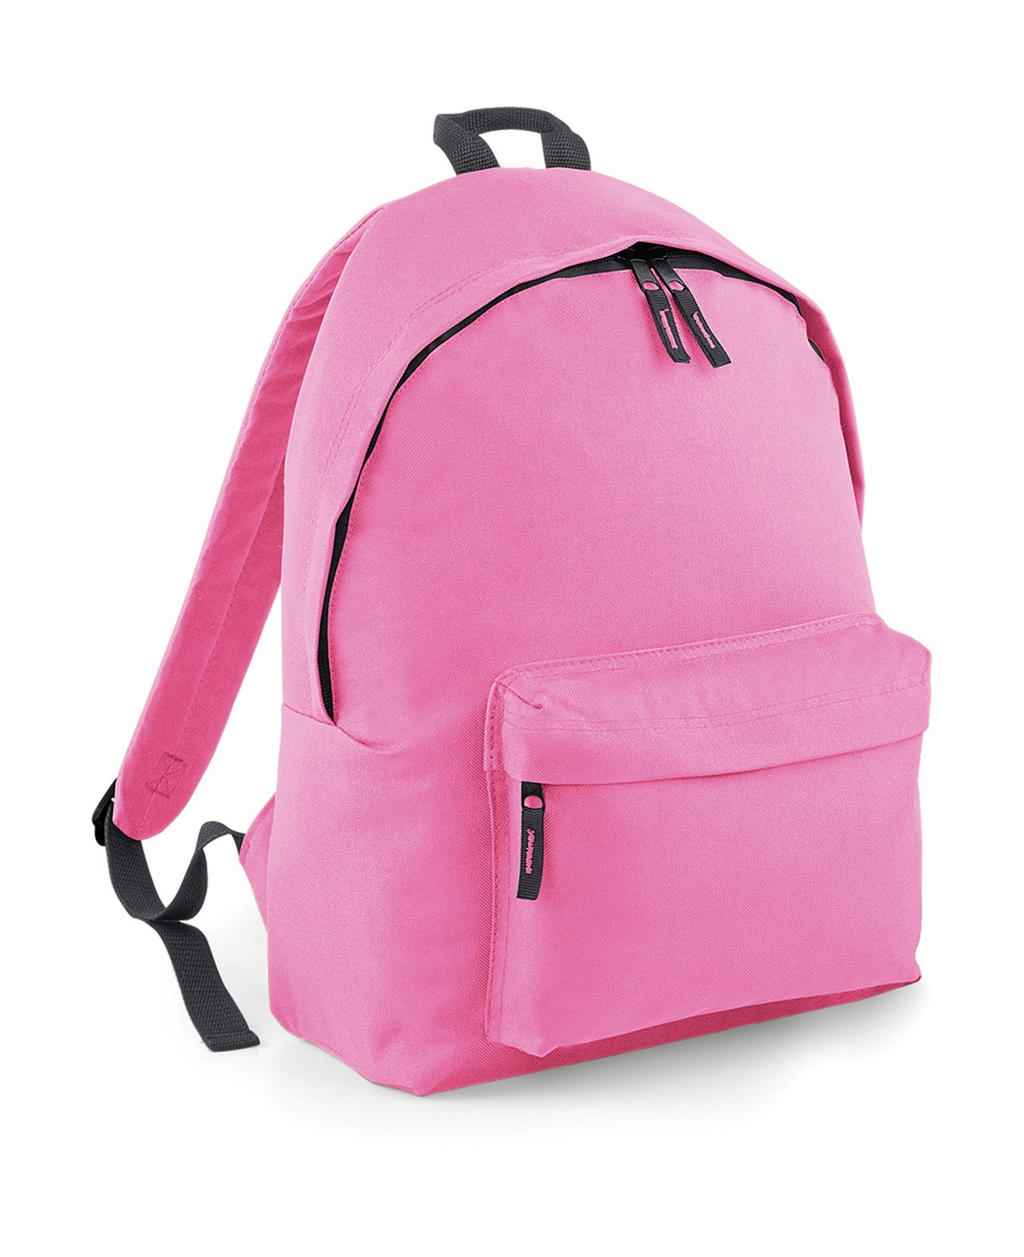 Fashion Backpack Classic Pink/Graphite Grey Rose